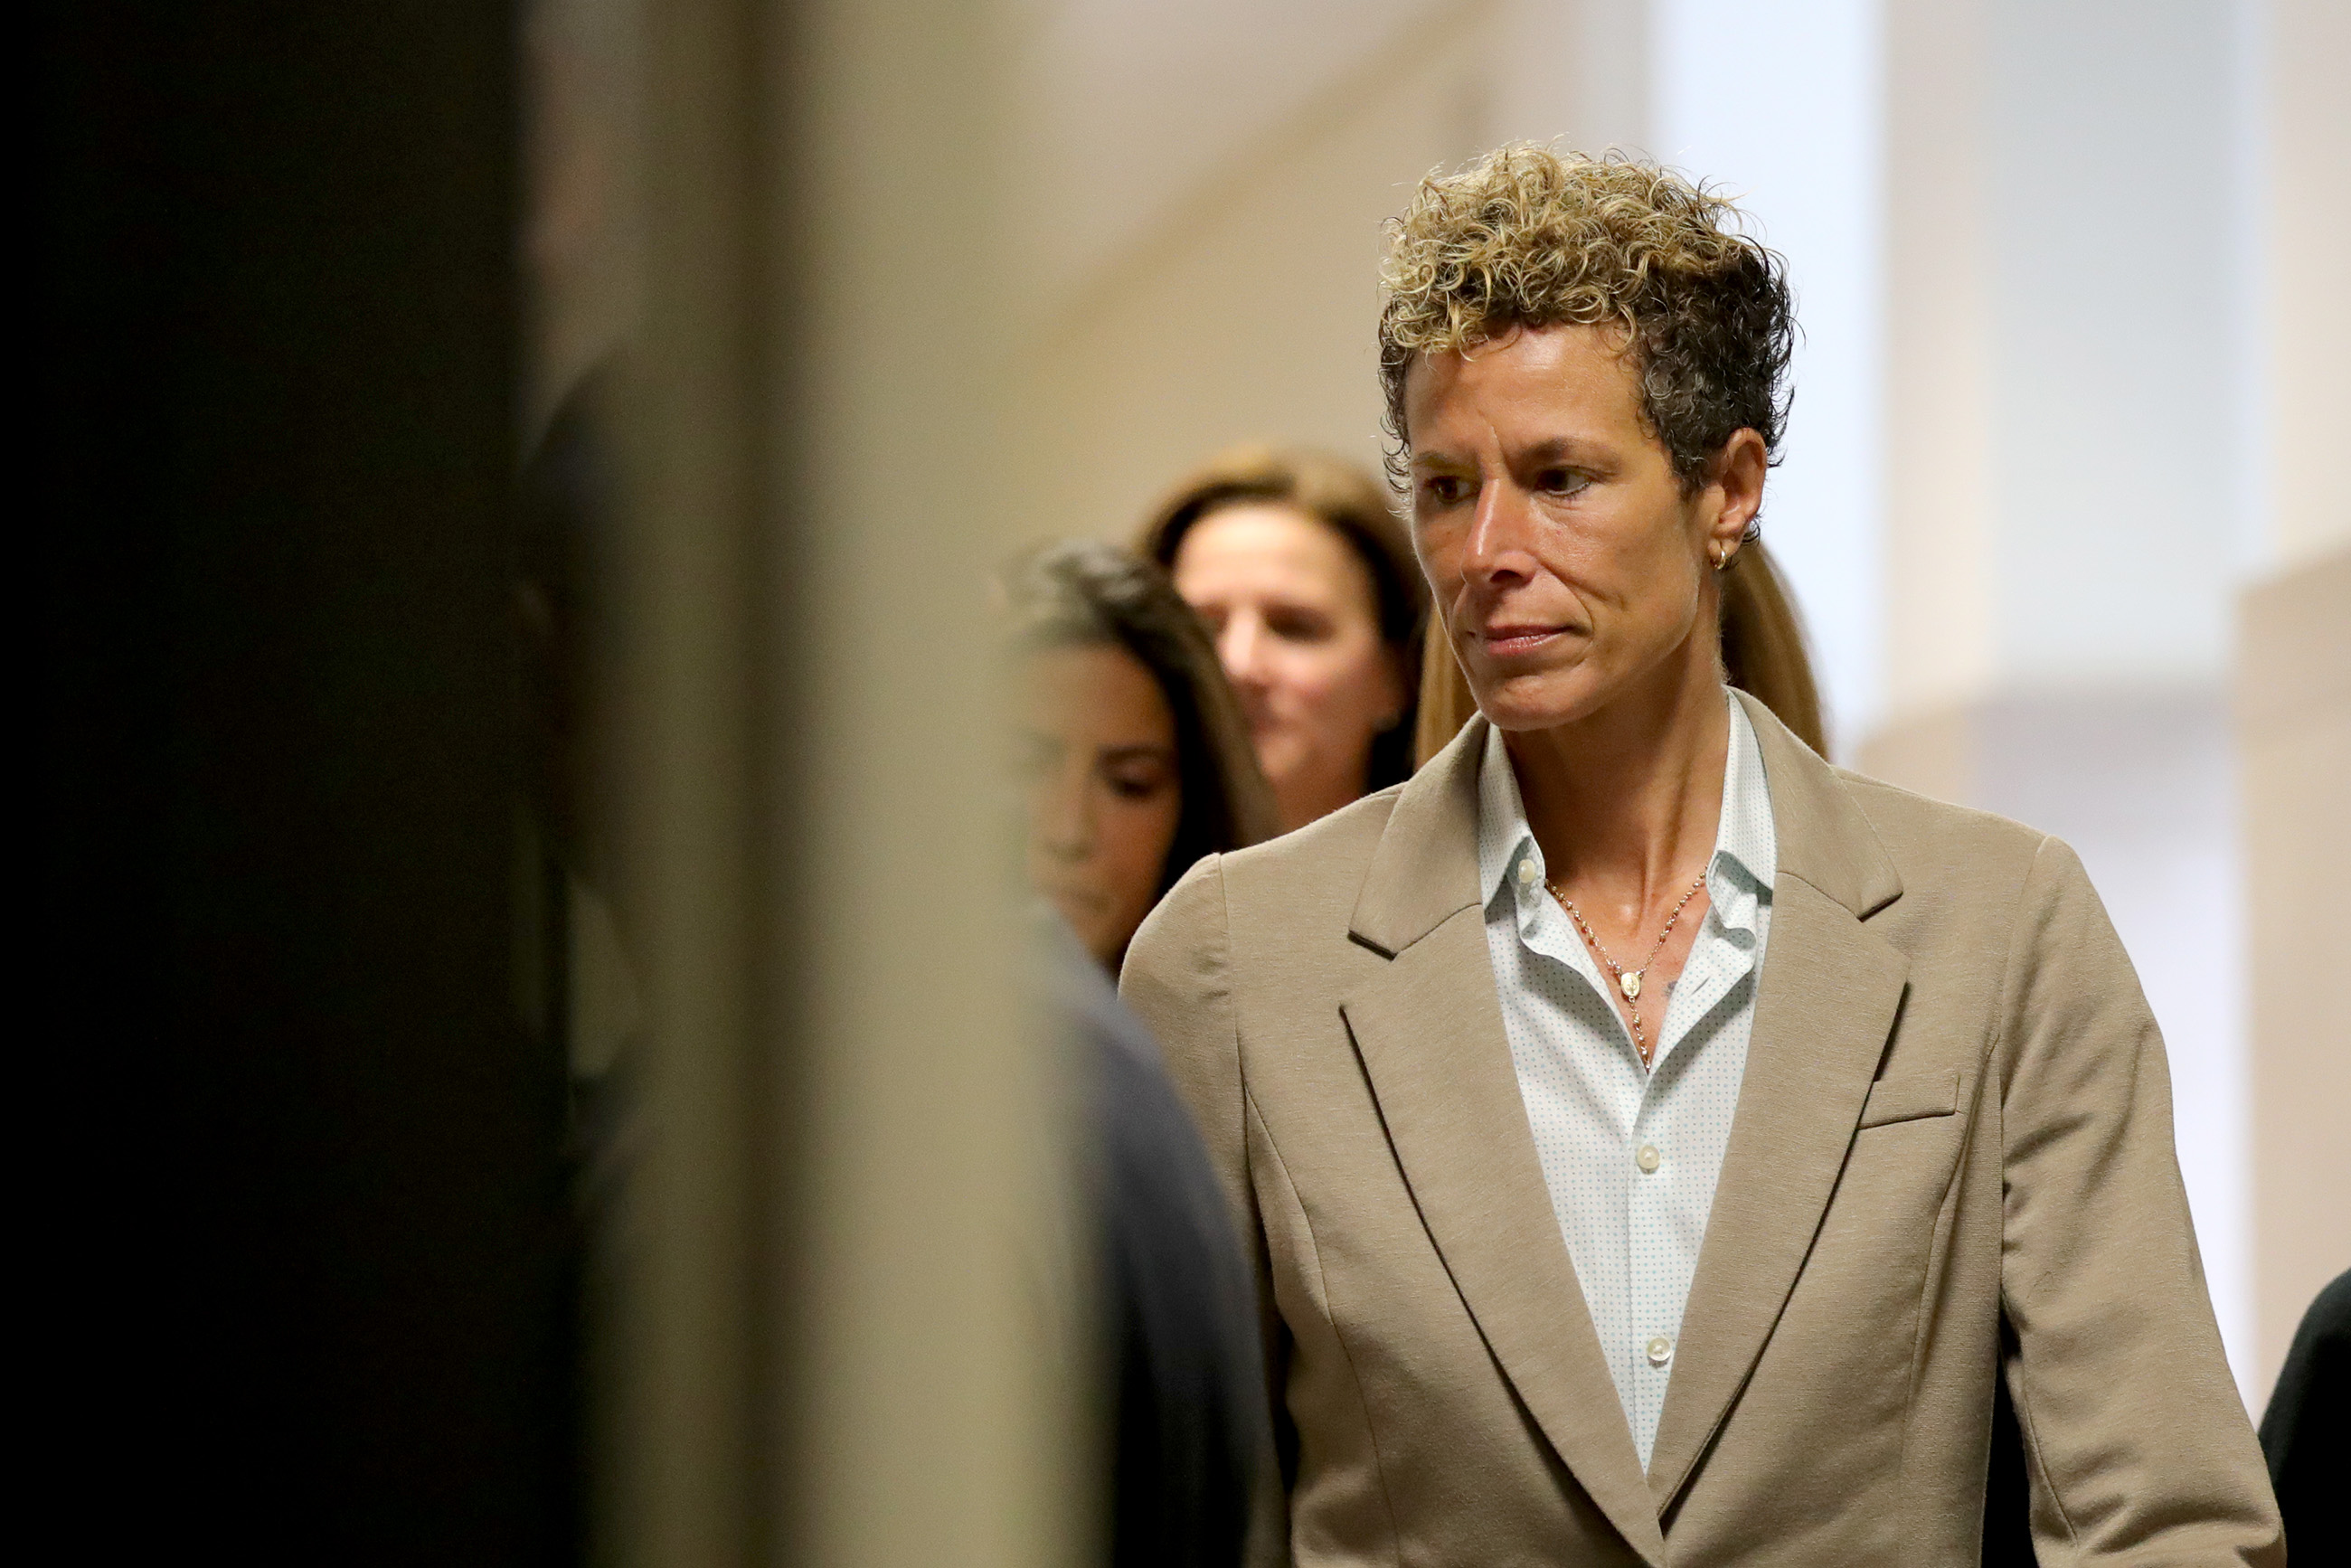 Andrea Constand arrives at the sentencing hearing for the sexual assault trial of entertainer Bill Cosby at the Montgomery County Courthouse September 24, 2018 in Norristown, Pennsylvania. (Pool—Getty Images) (Pool—Getty Images)